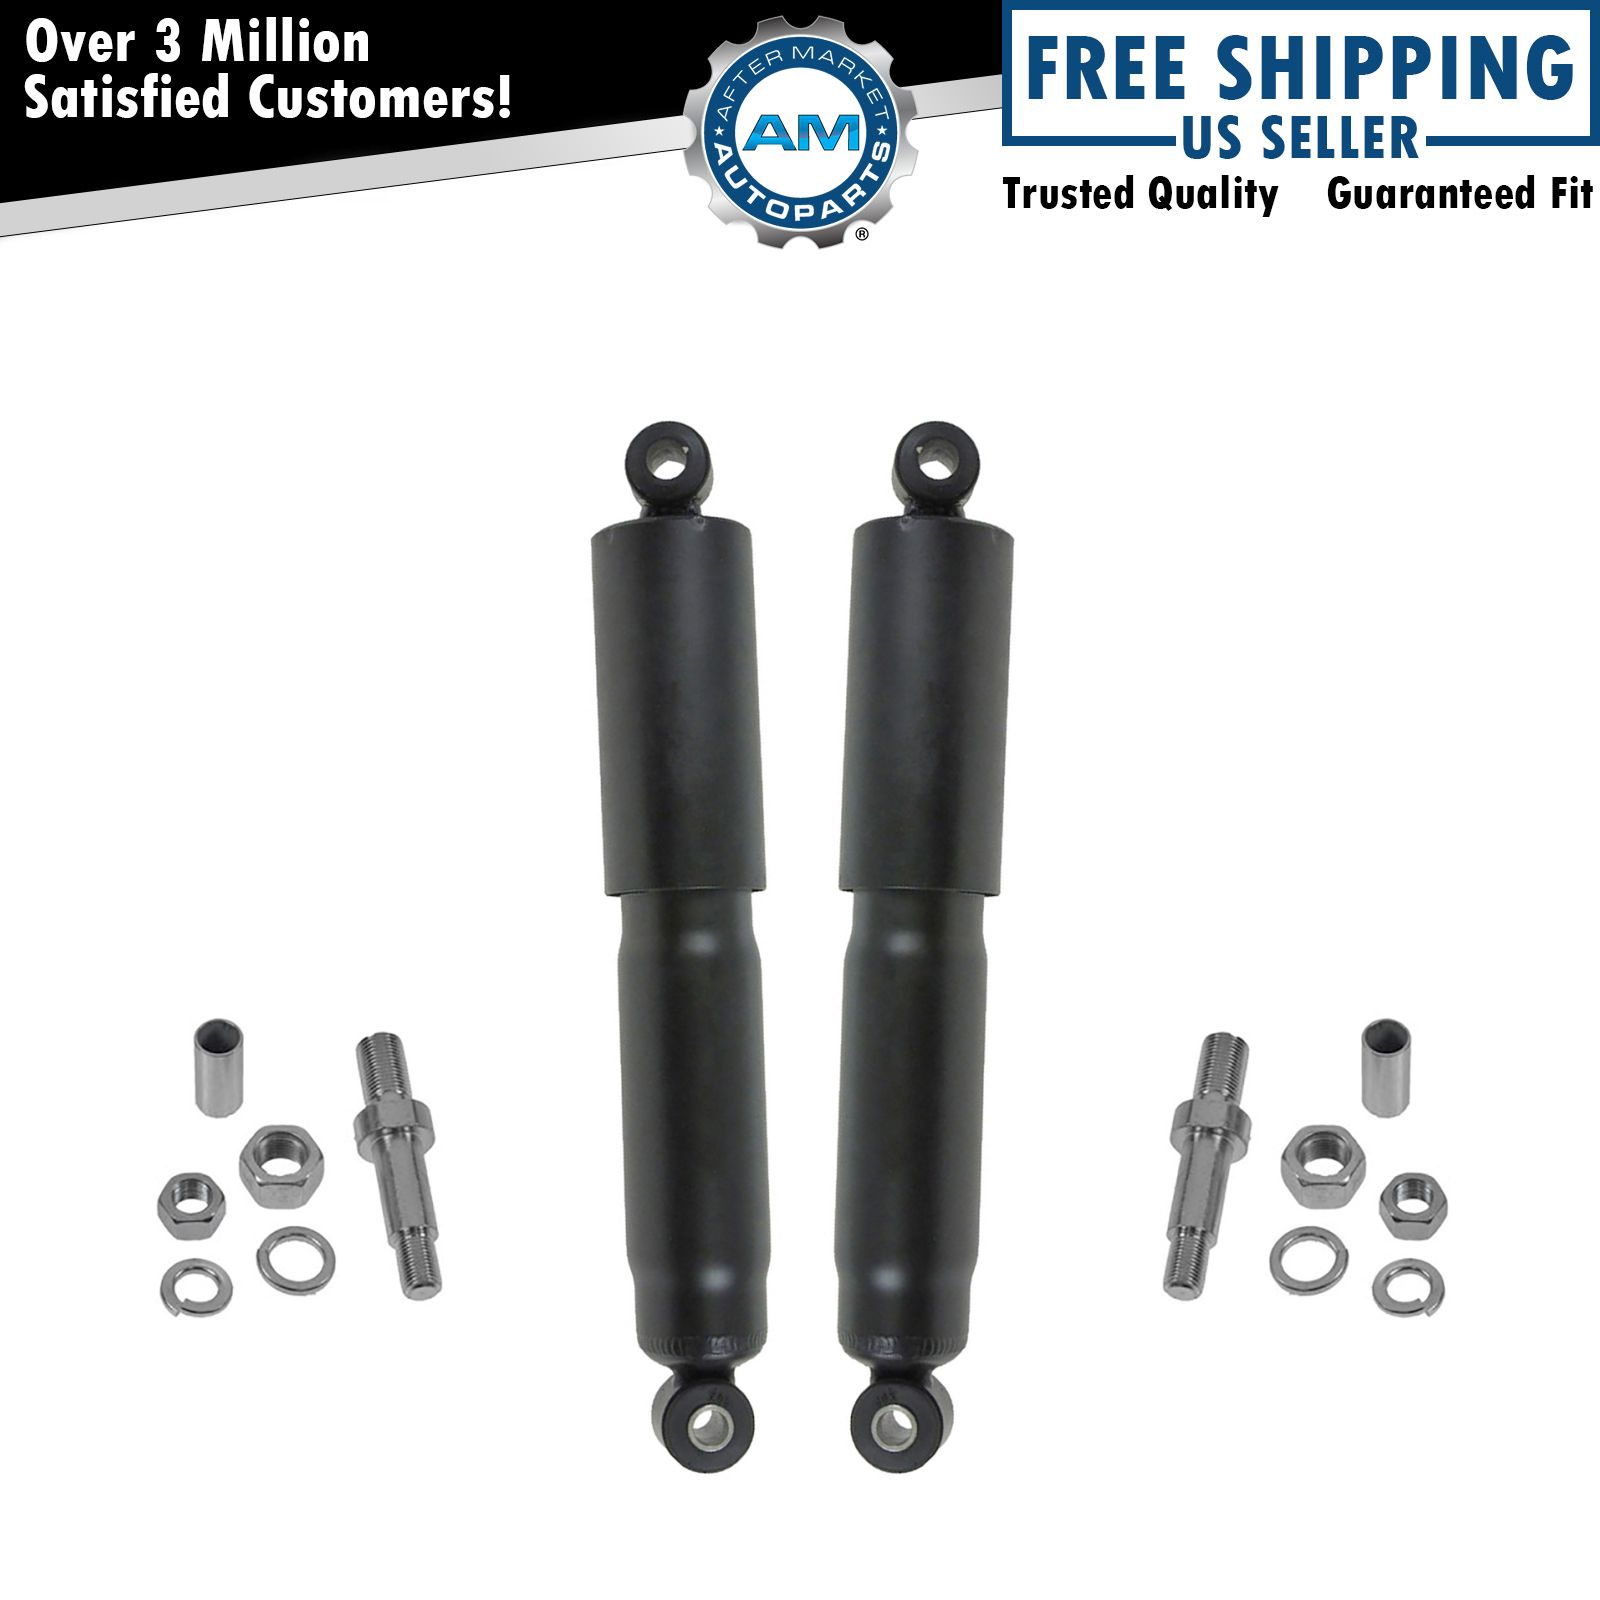 Front Strut Shock Absorber Pair Set for Chevy GMC Pickup Truck SUV Van 2WD